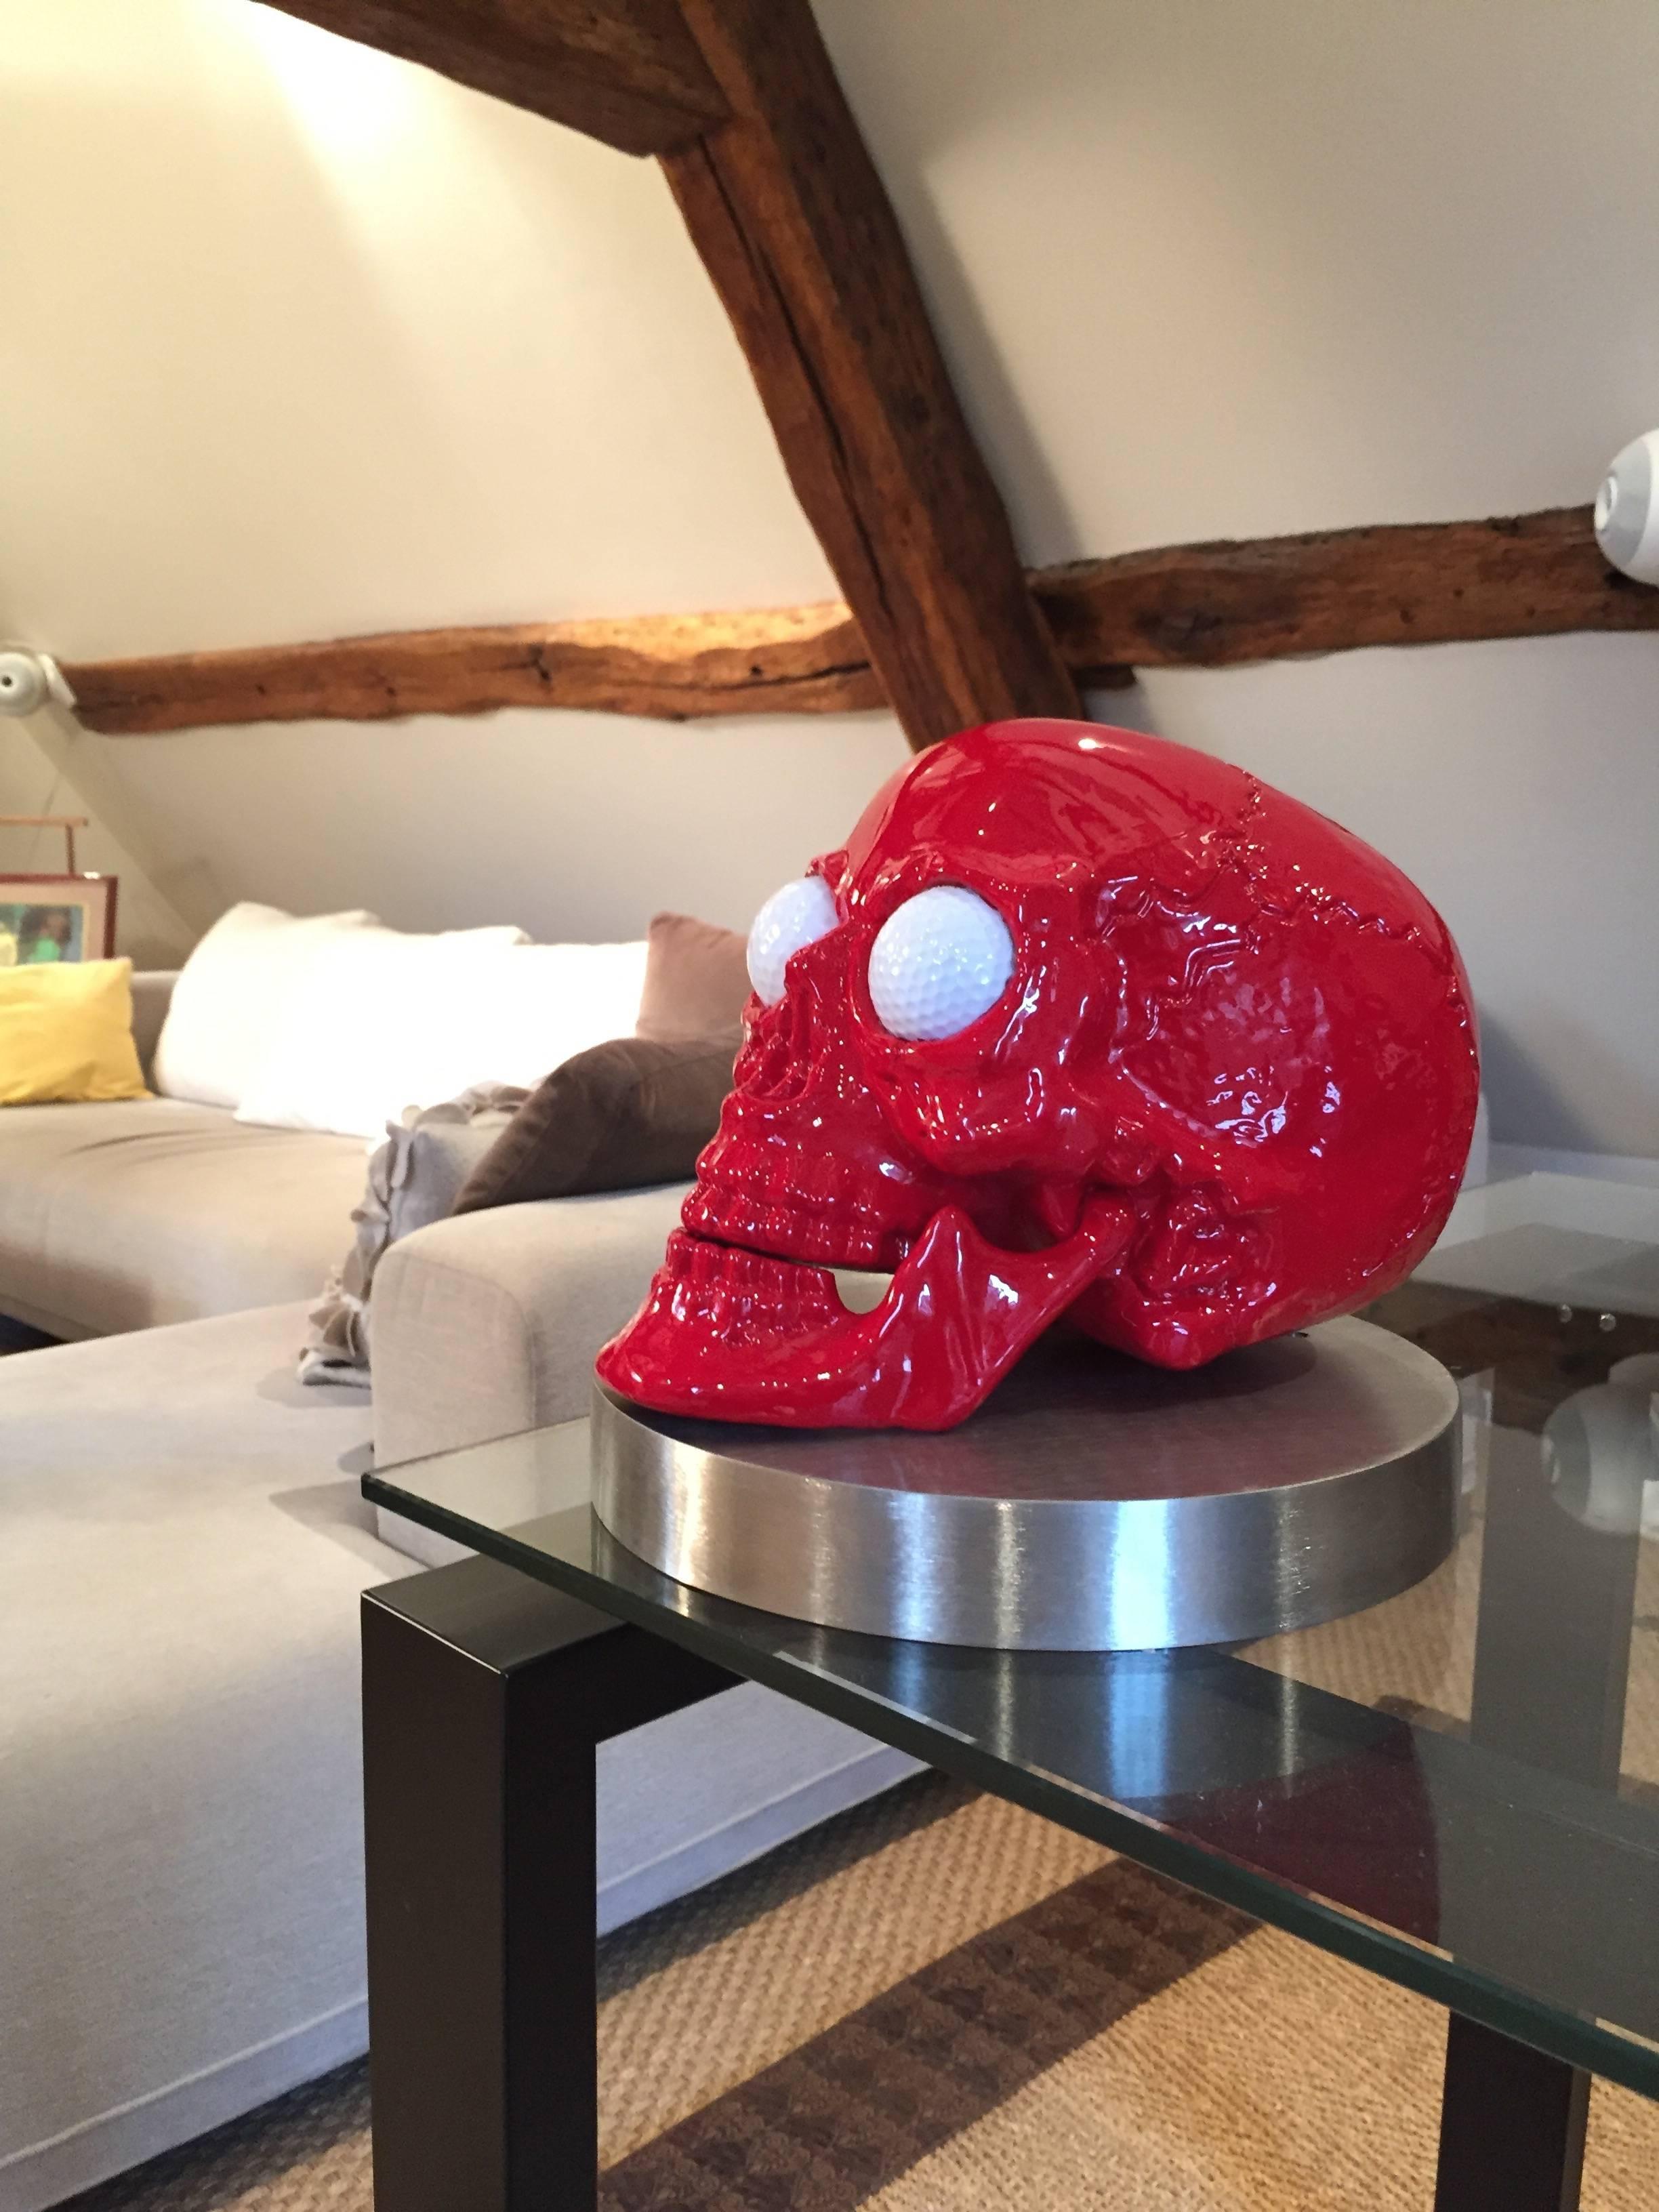 Craneur - Resin Skull, Golf Balls Eyes and Stainless Steel Base by Hubert Privé In Excellent Condition For Sale In London, GB